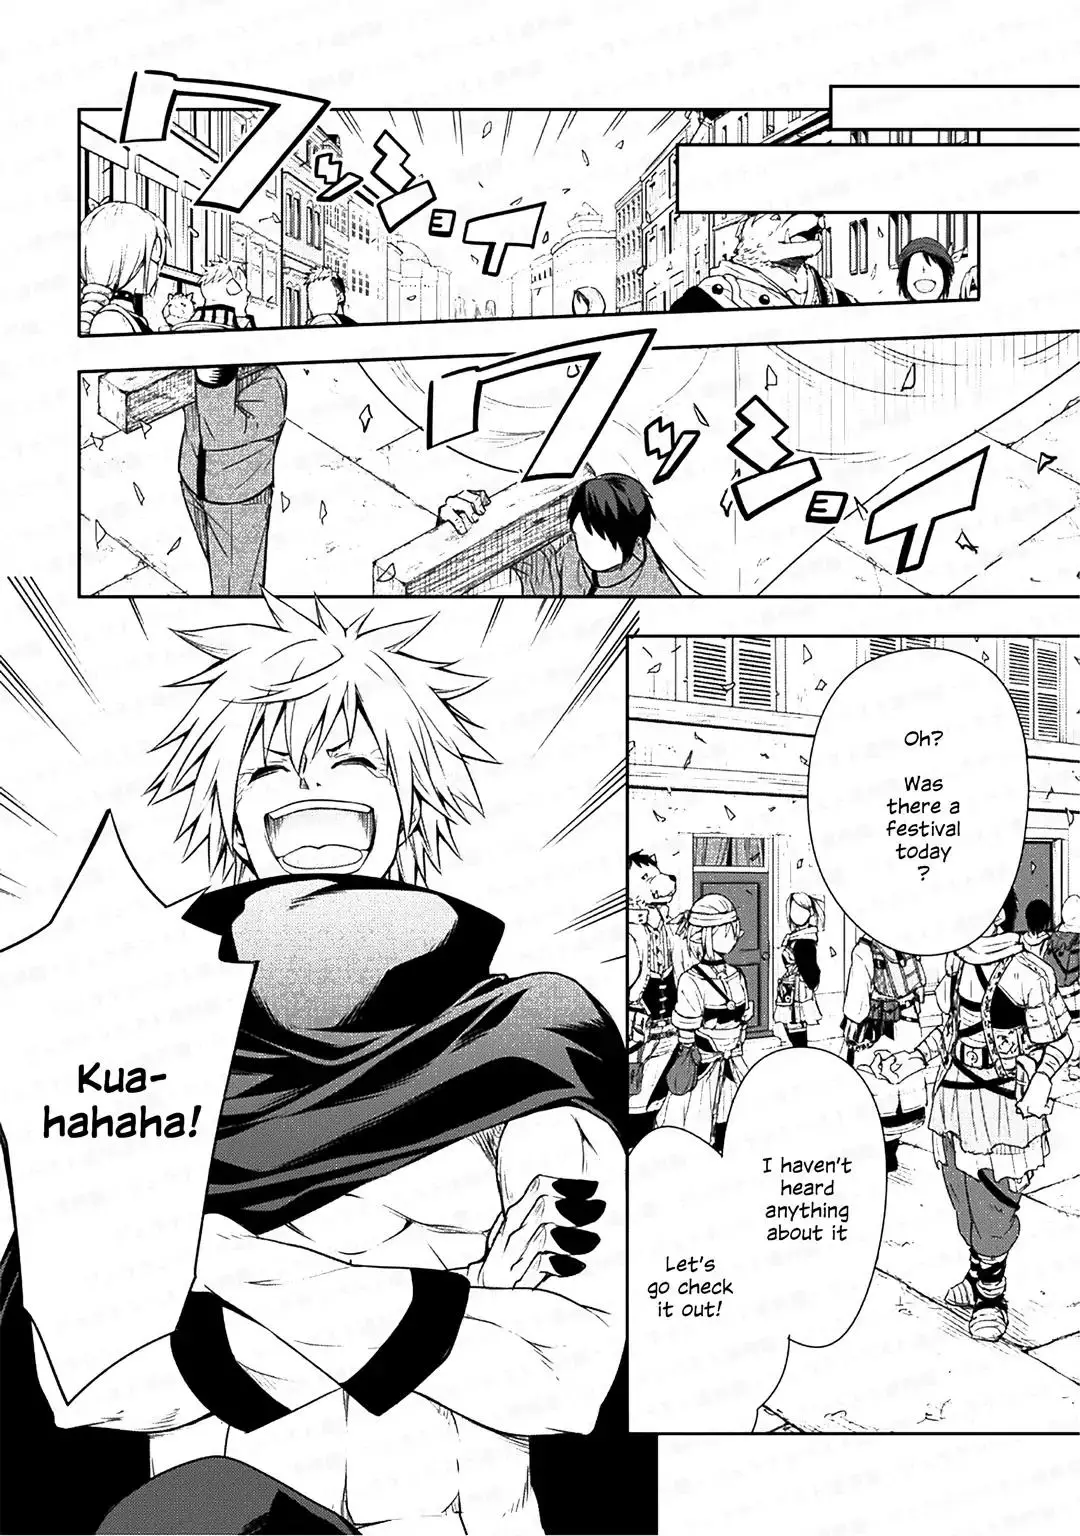 Tensei Shitara Slime Datta Ken: The Ways of Strolling in the Demon Country - 26 page 11